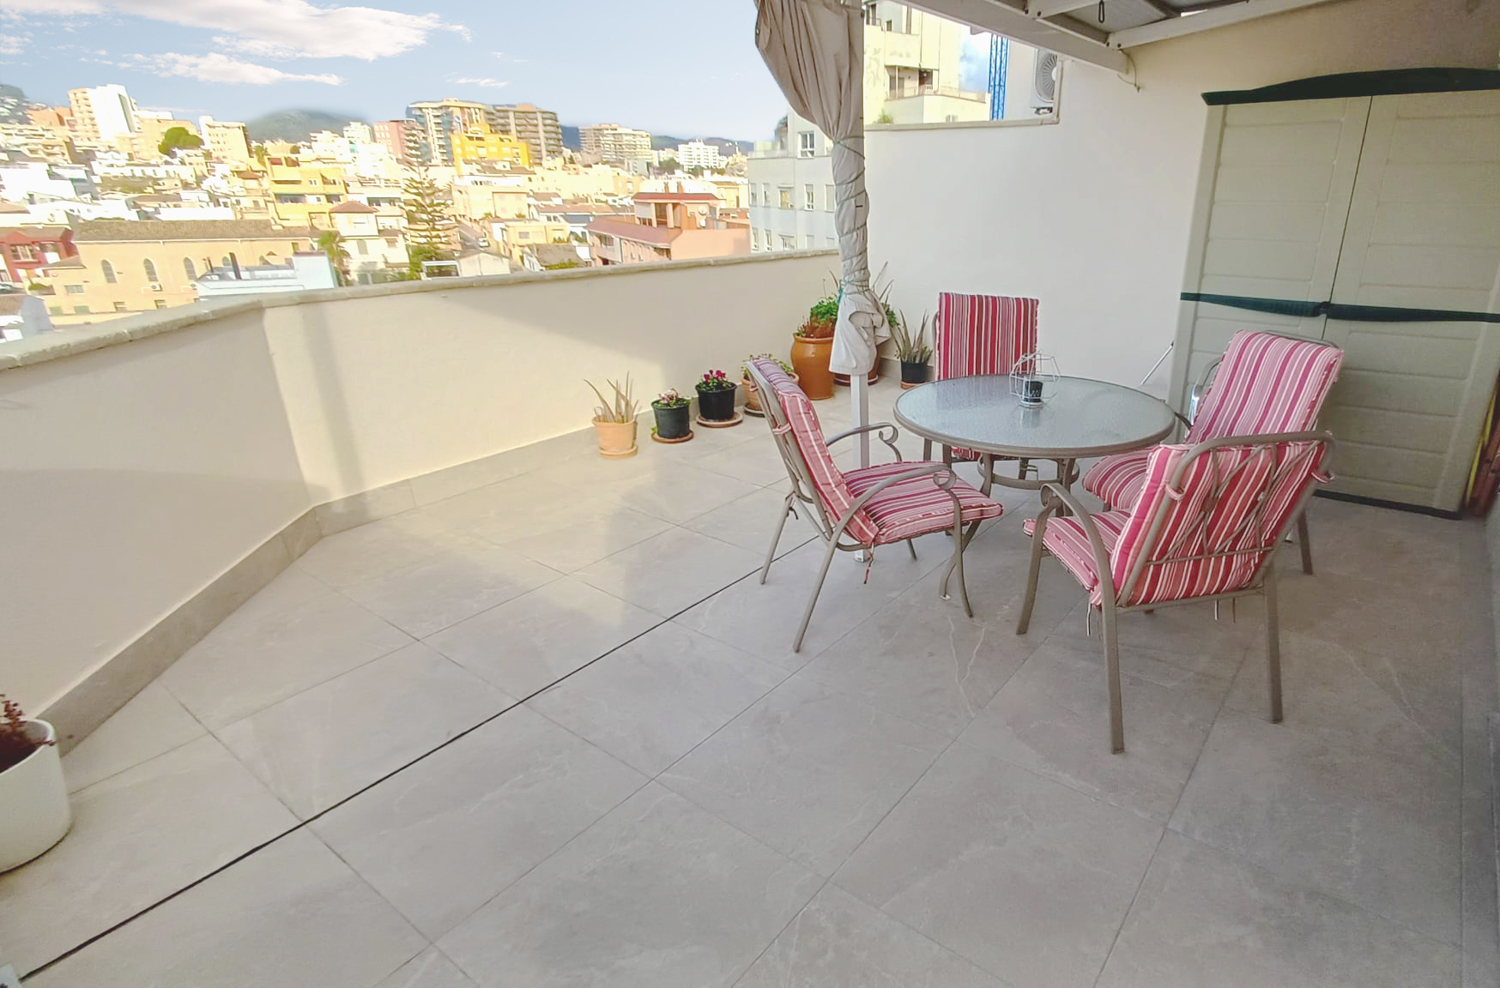 Bright and cosy flat with stunning views of the Bellver Castle and the port of Palma